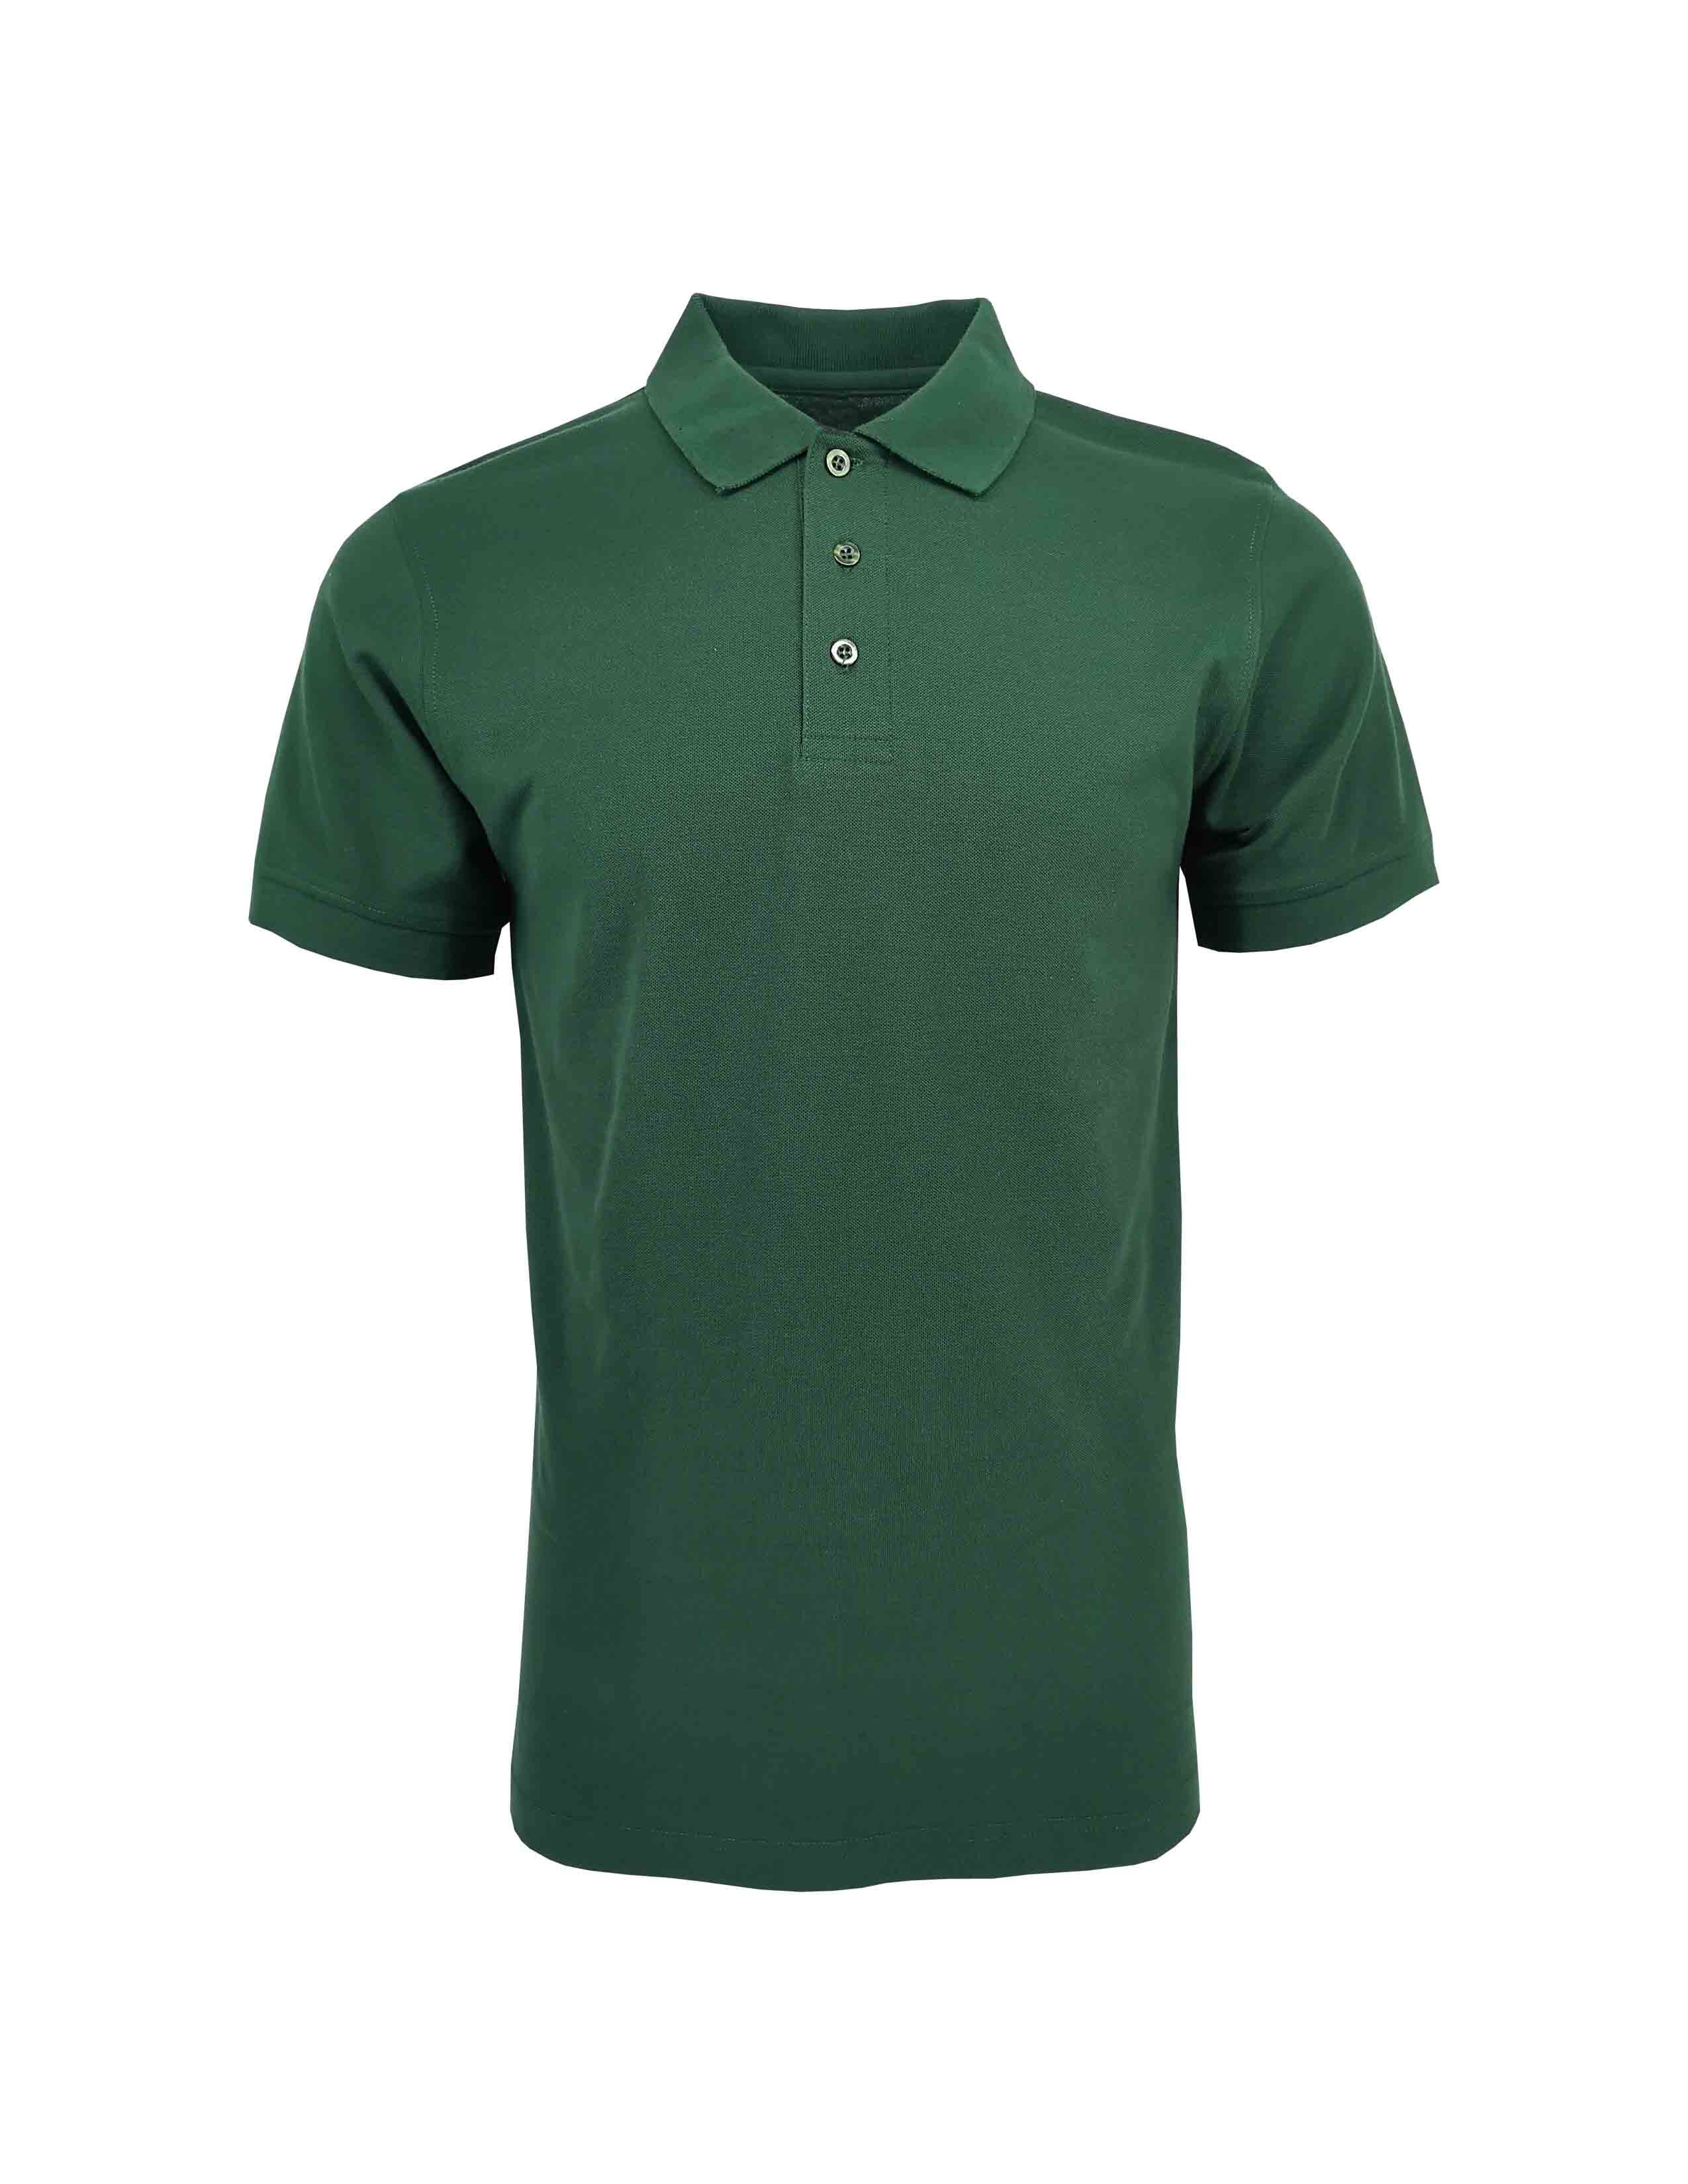 RIGHTWAY New Cotton Blend Polo Unisex Plain Cotton Polyester Soft Material Polo Tee CBP70 Full Color Available